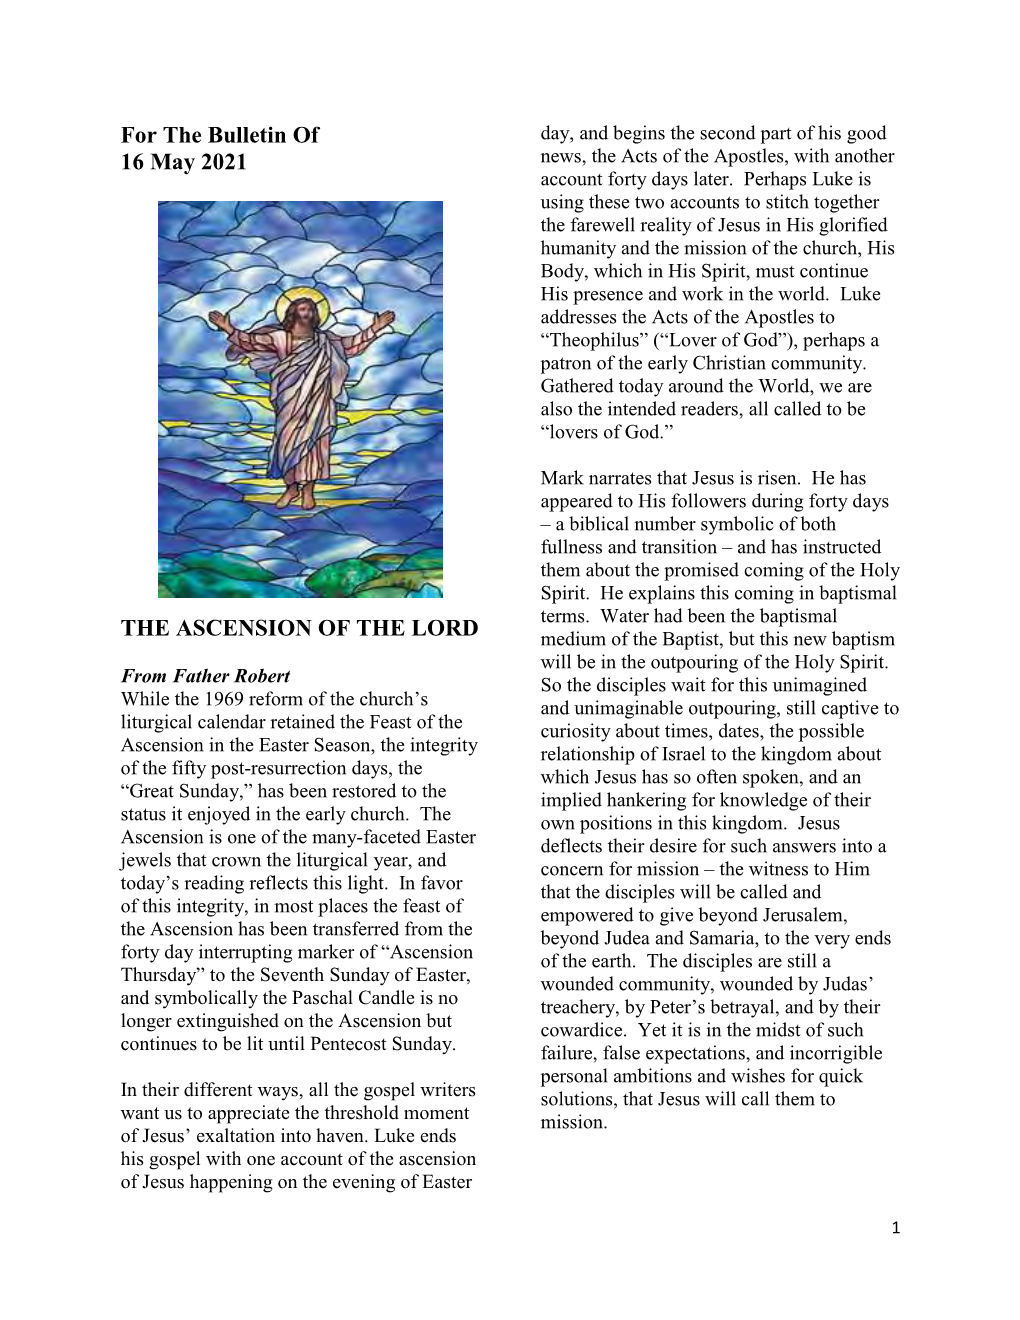 For the Bulletin of 16 May 2021 the ASCENSION of the LORD